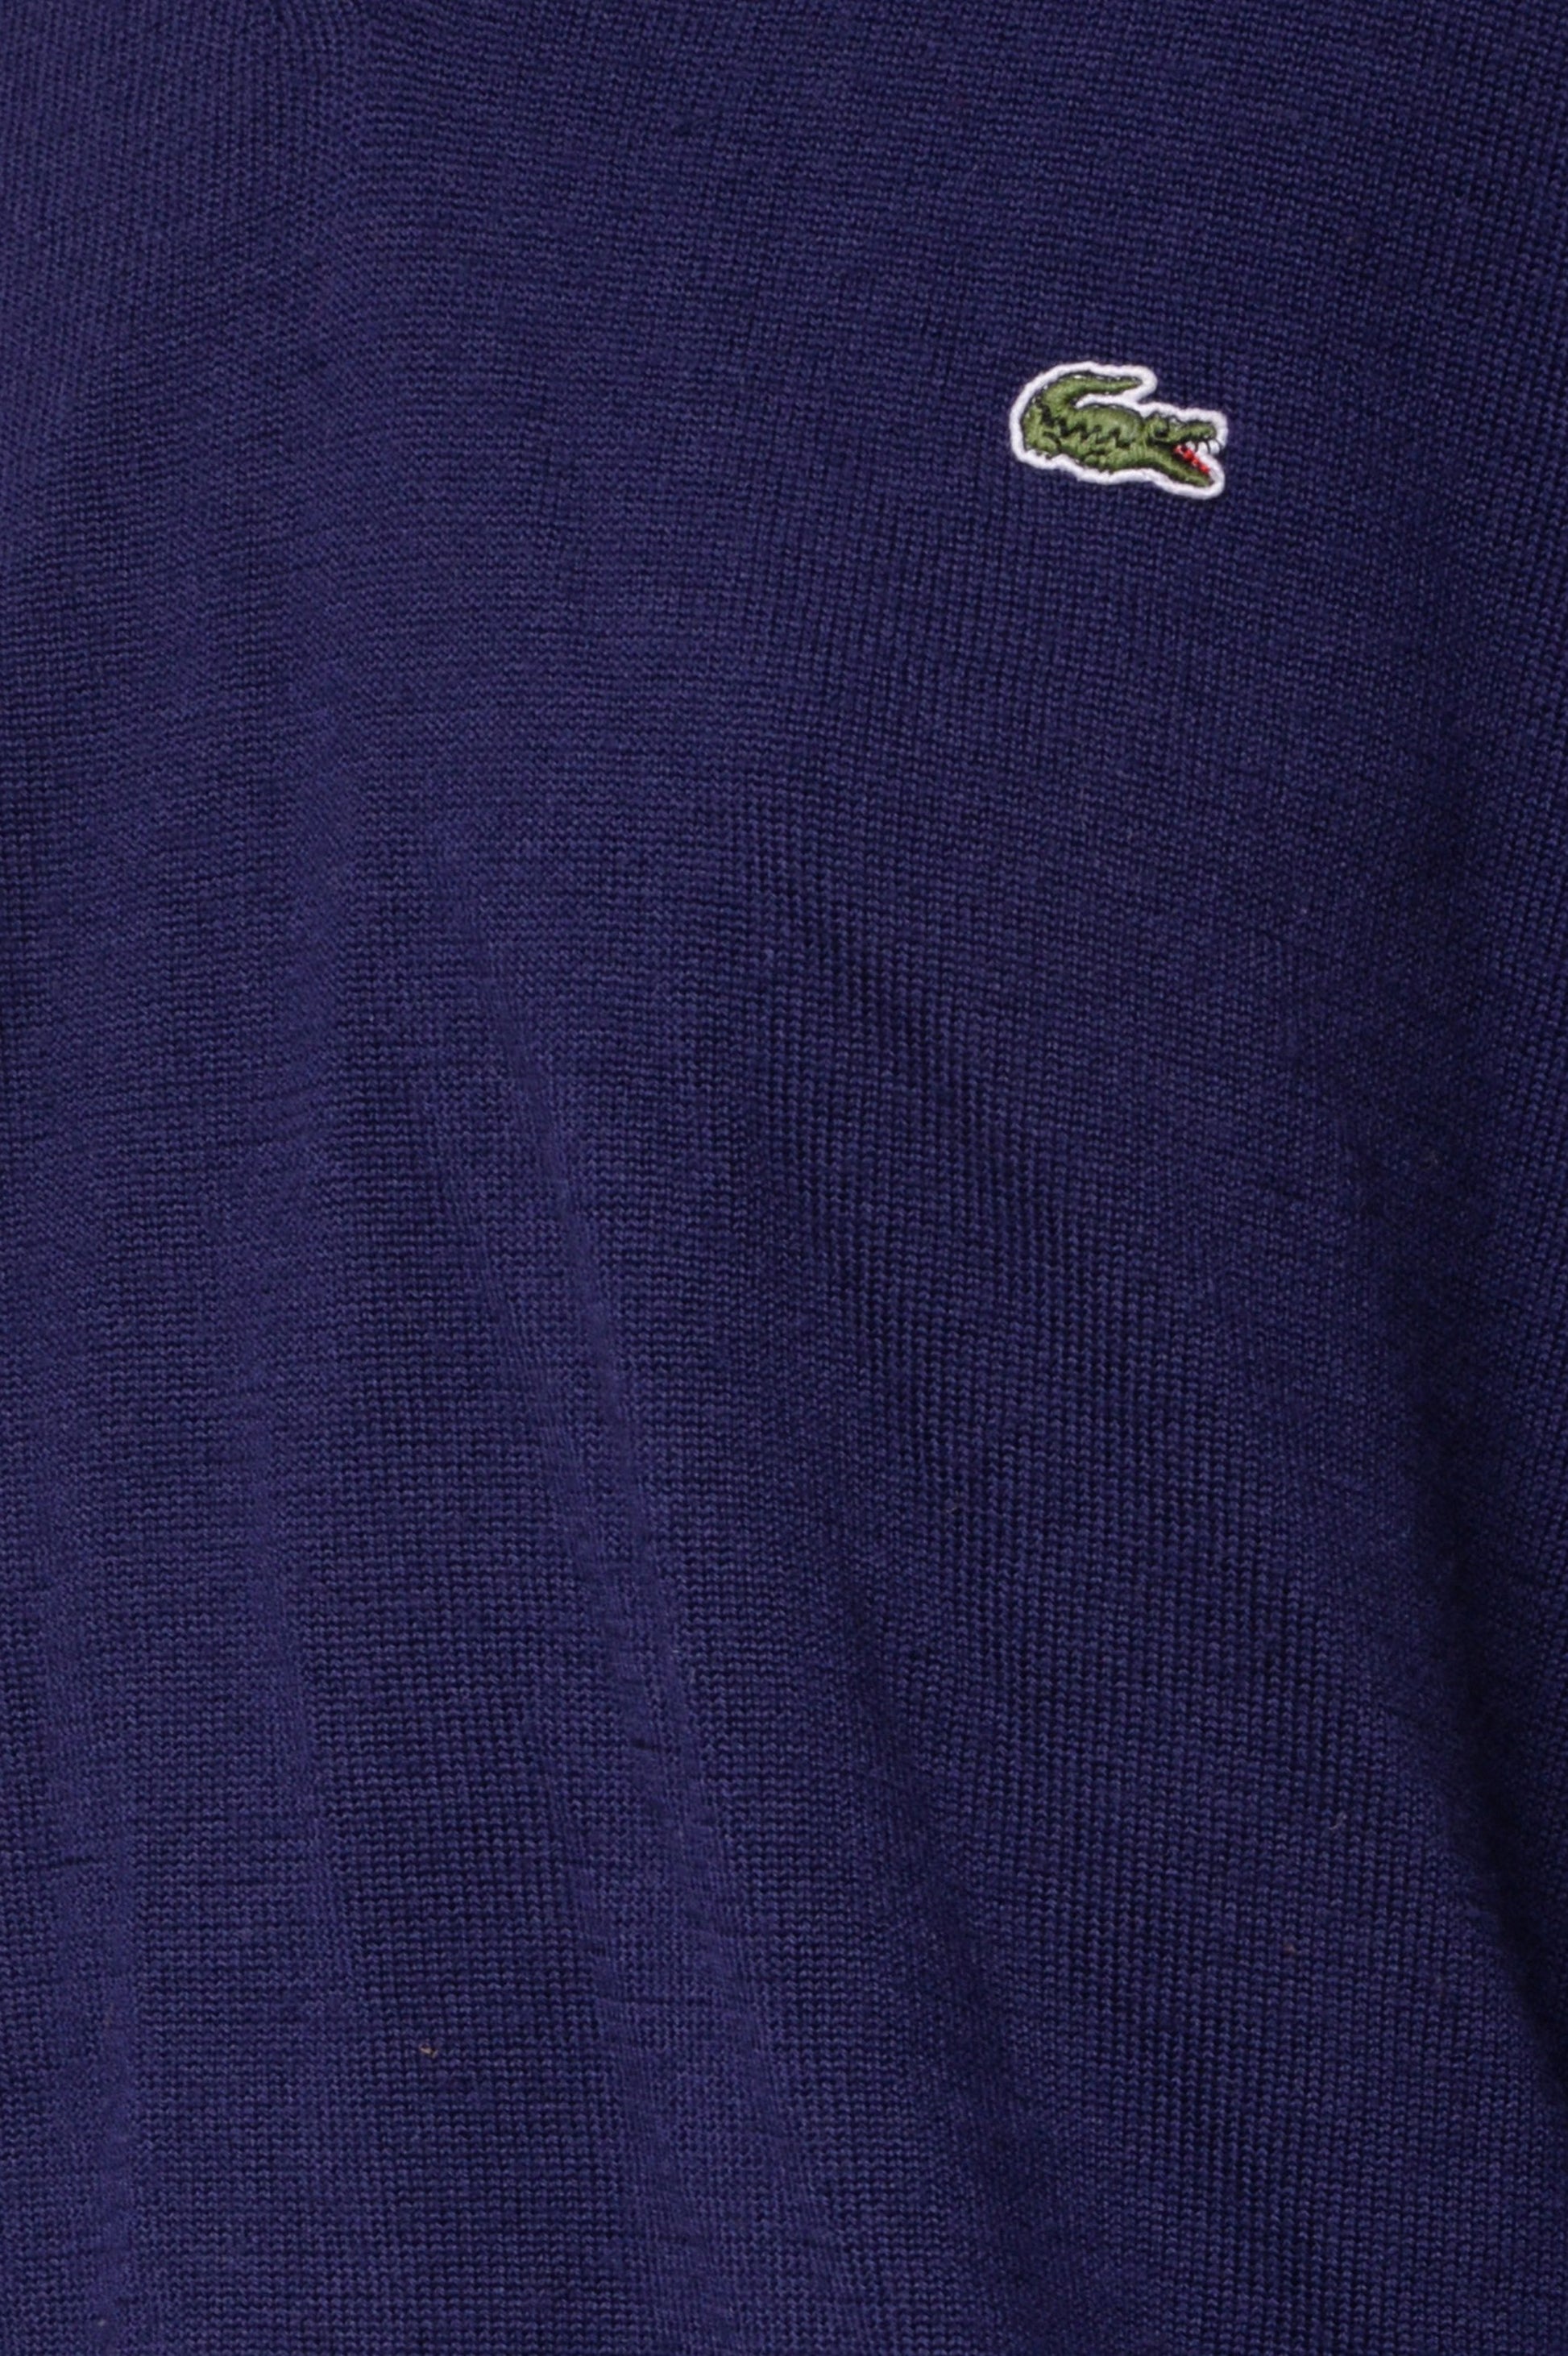 Navy Lacoste Sweater